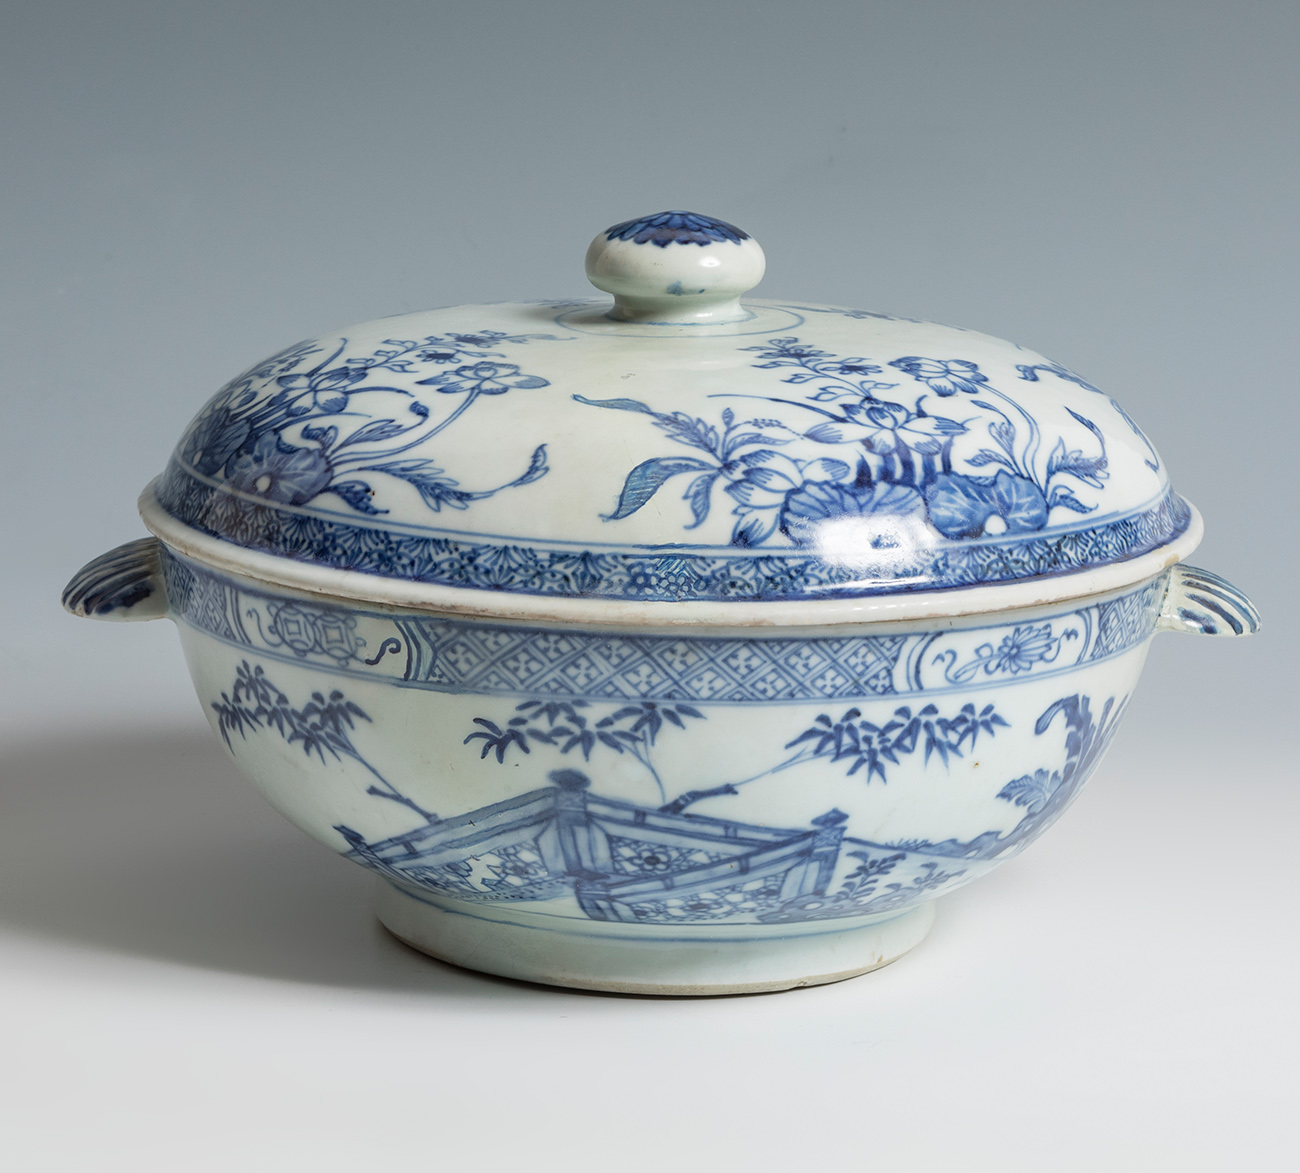 Chinese tureen, 18th century.Enamelled porcelain.With Peter G. Wells Antiquities label.Measures: